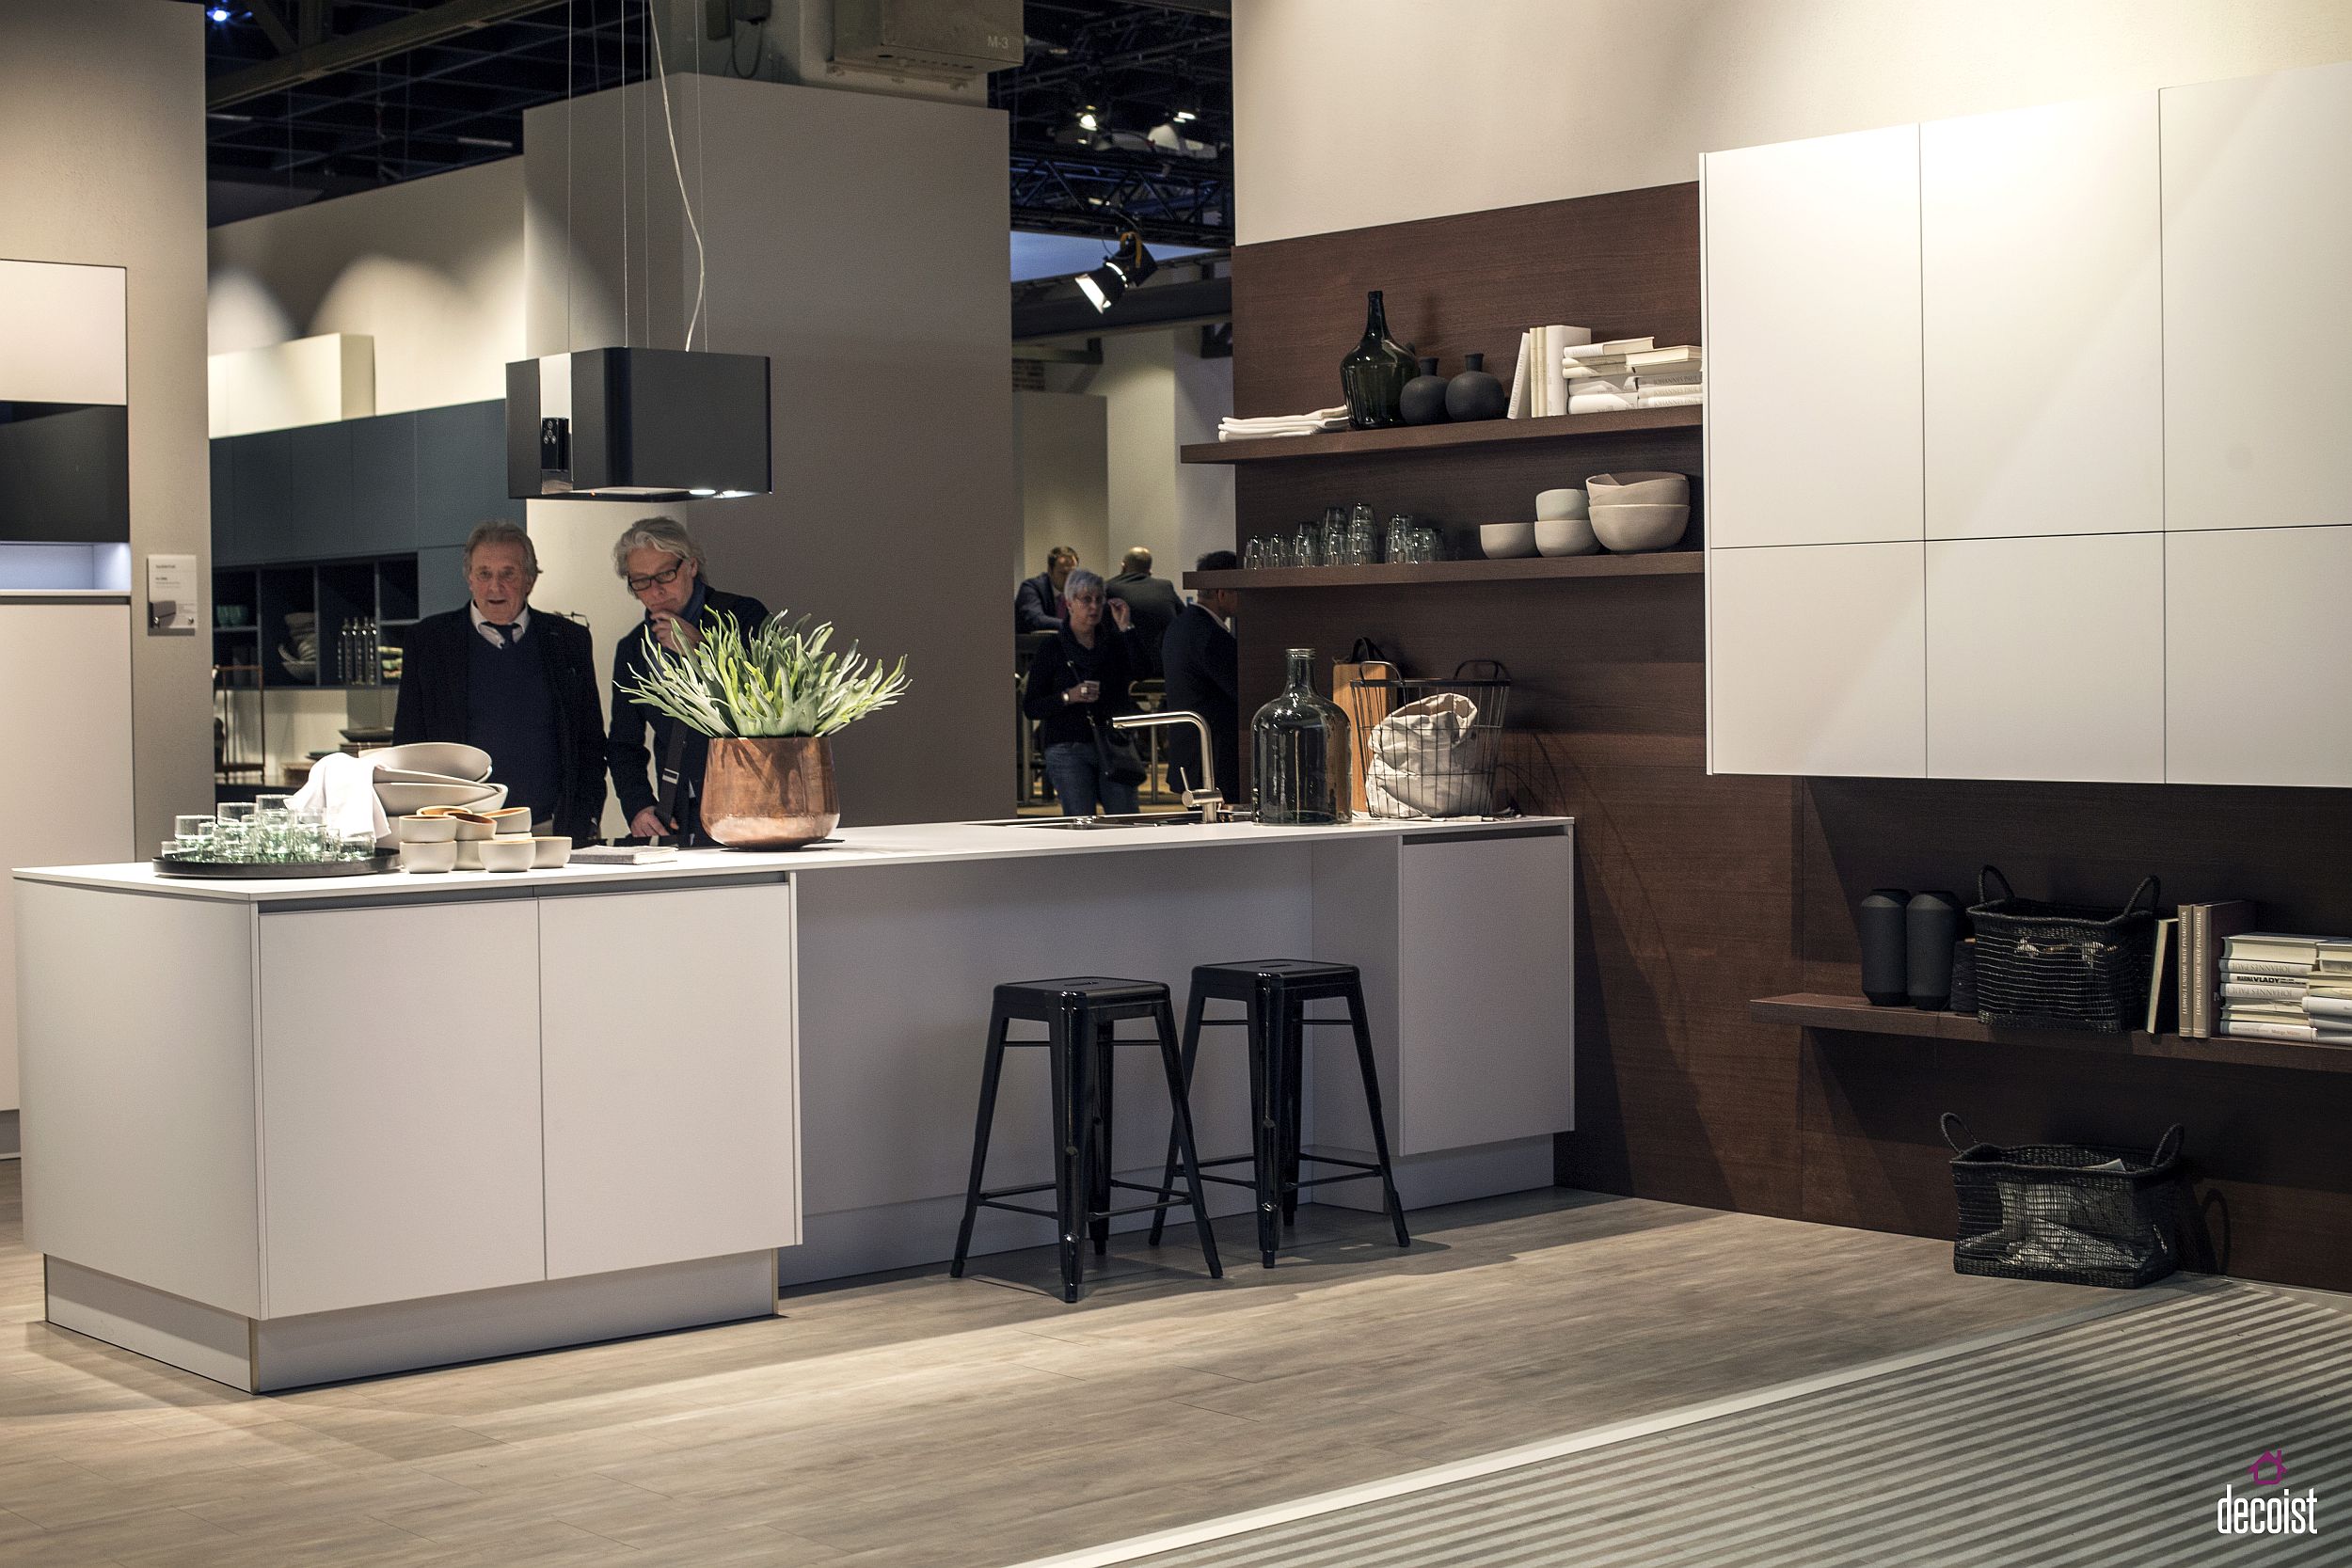 German made kitchens from Hacker are both functional and fashionable